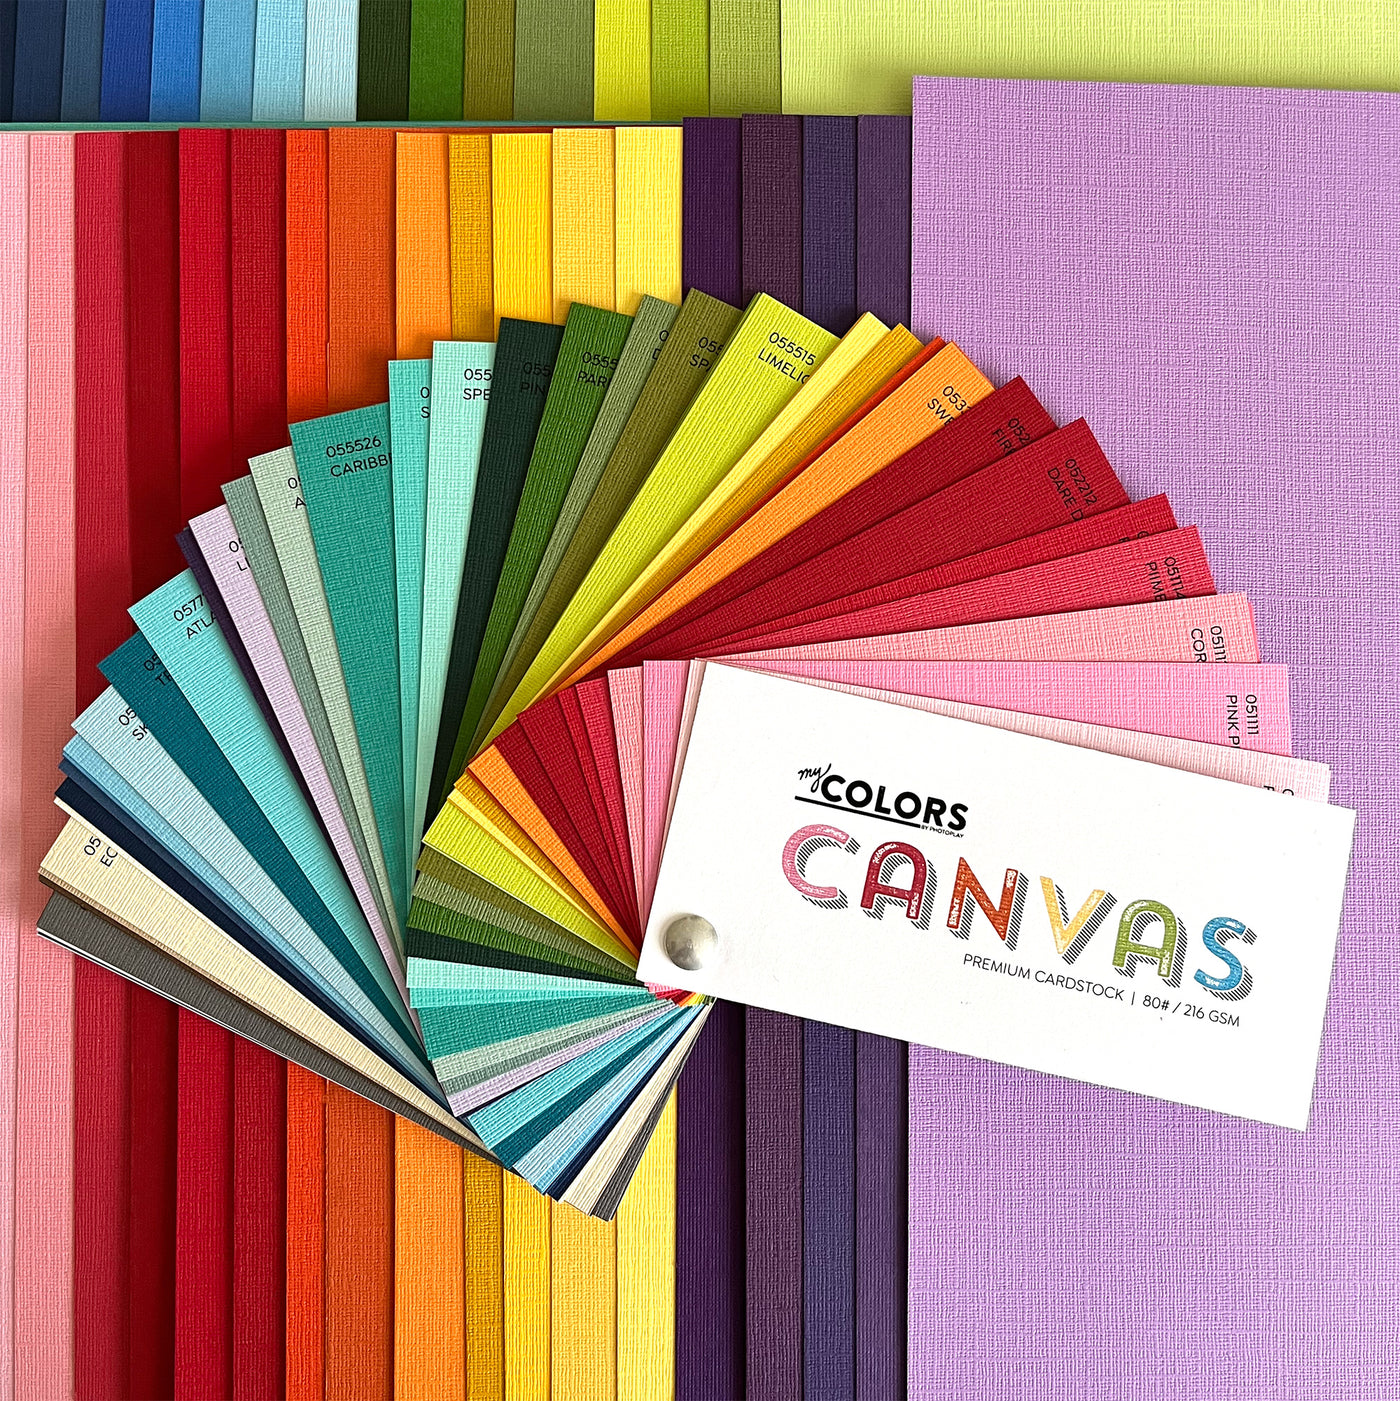 My Colors Canvas Cardstock Swatch Book